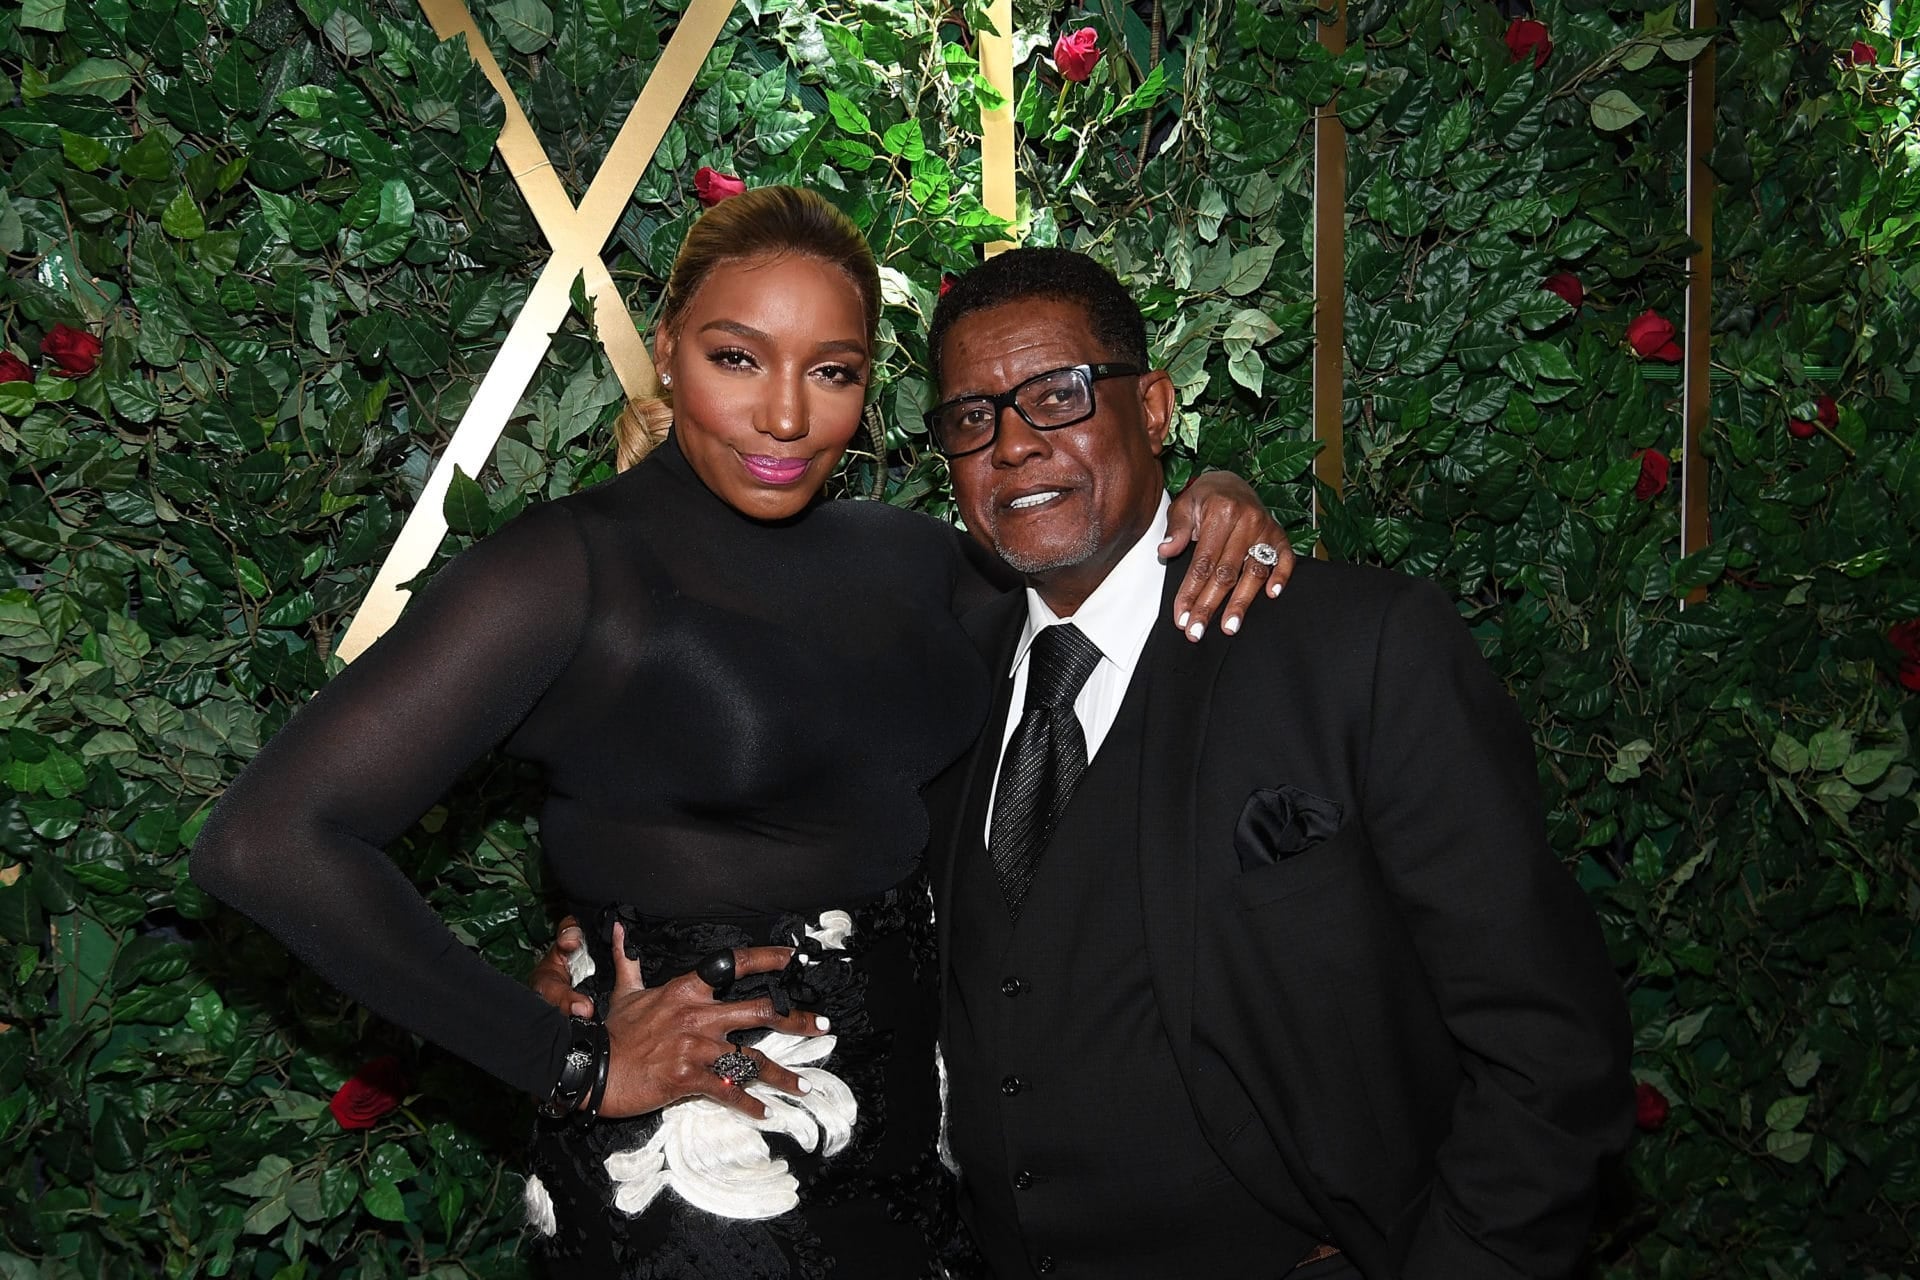 Nene Leakes Shuts Down Divorce Rumors: ‘Gregg Leakes and I Are VERY Much Together!’